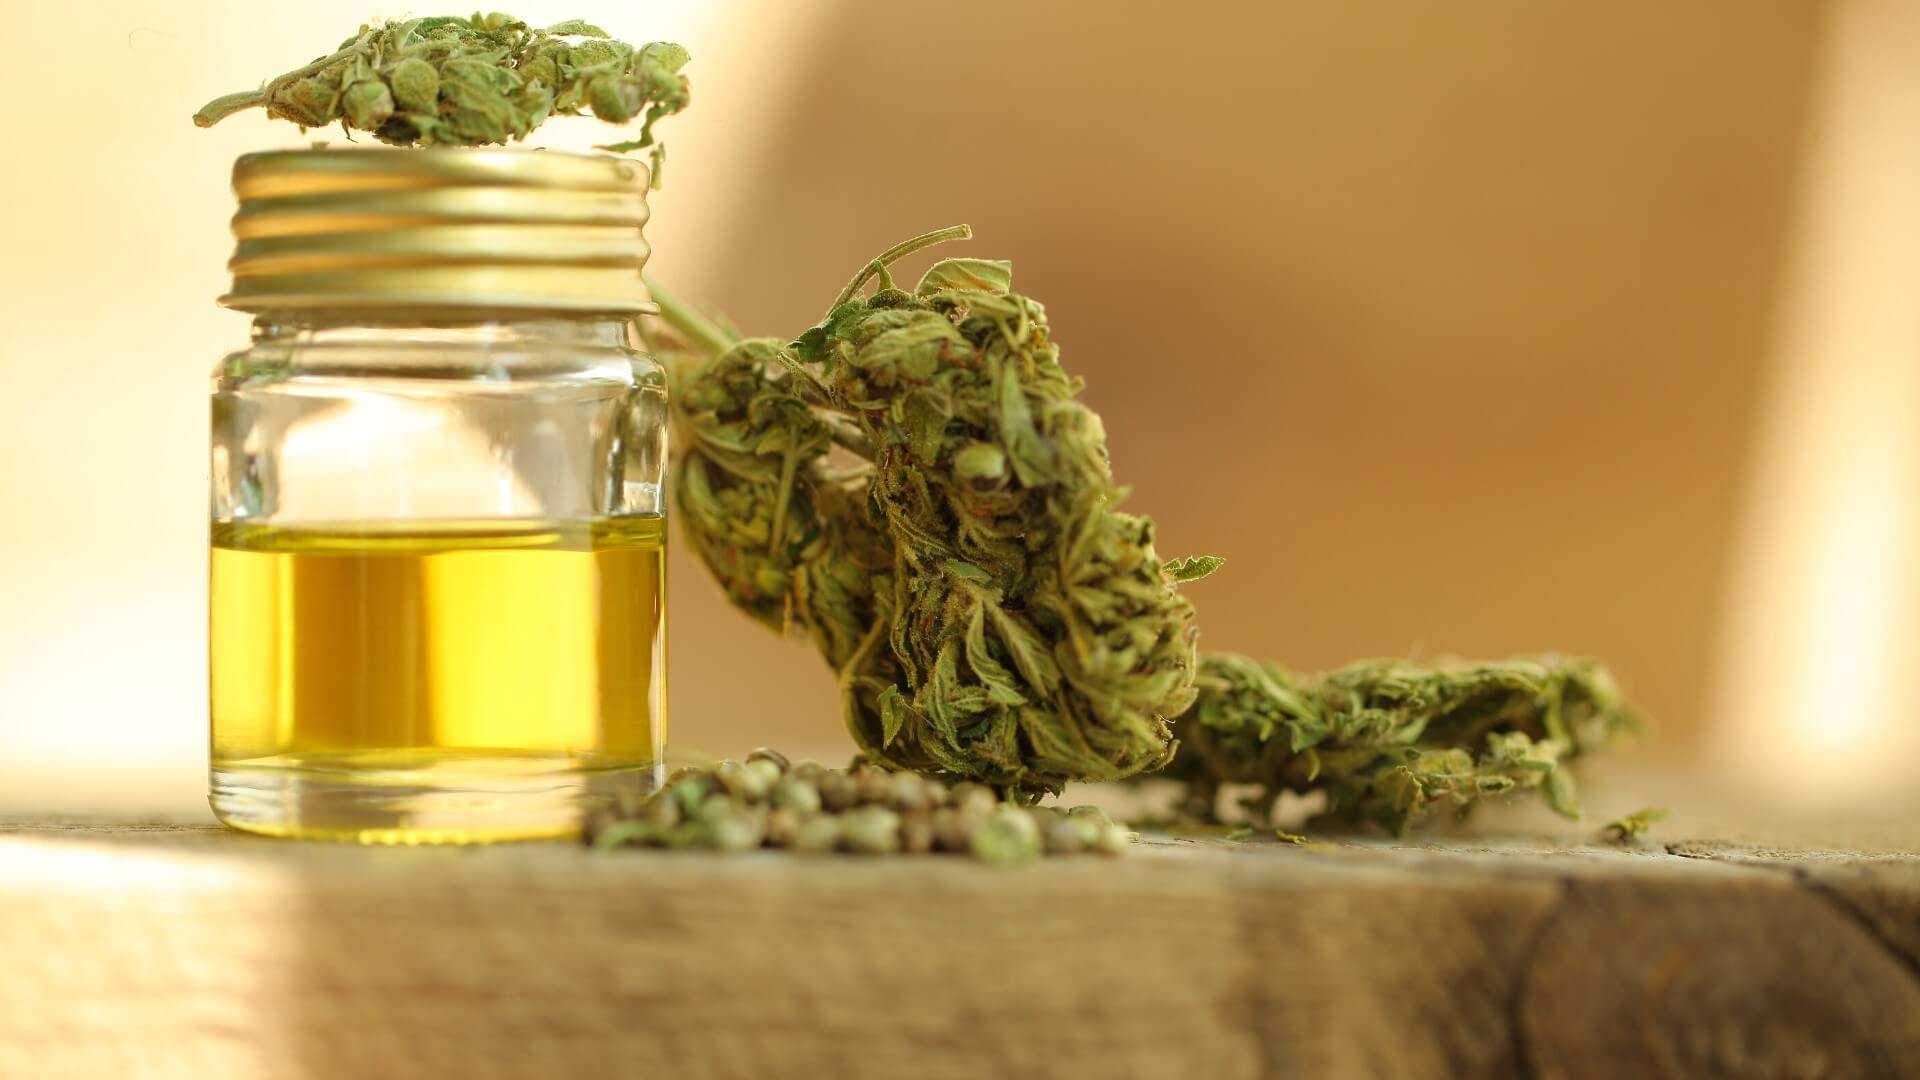 Chemotherapy Doses Could Be Lowered Through CBD